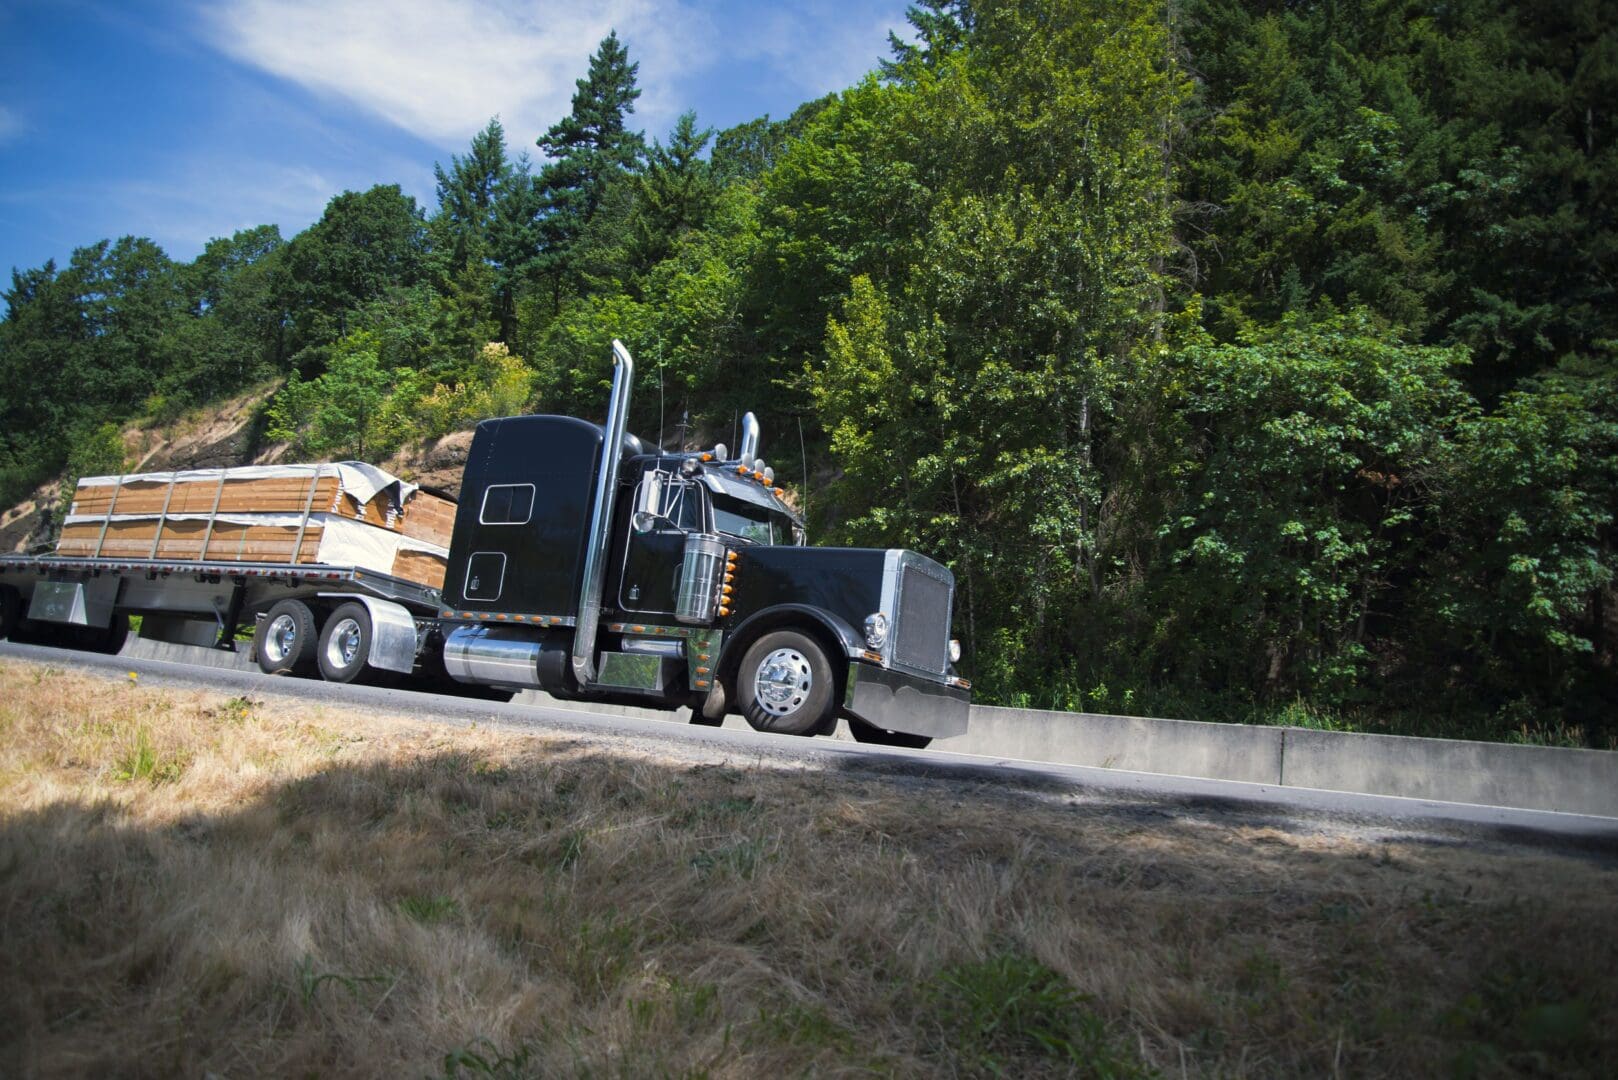 What Should You Do After a Trucking Accident?